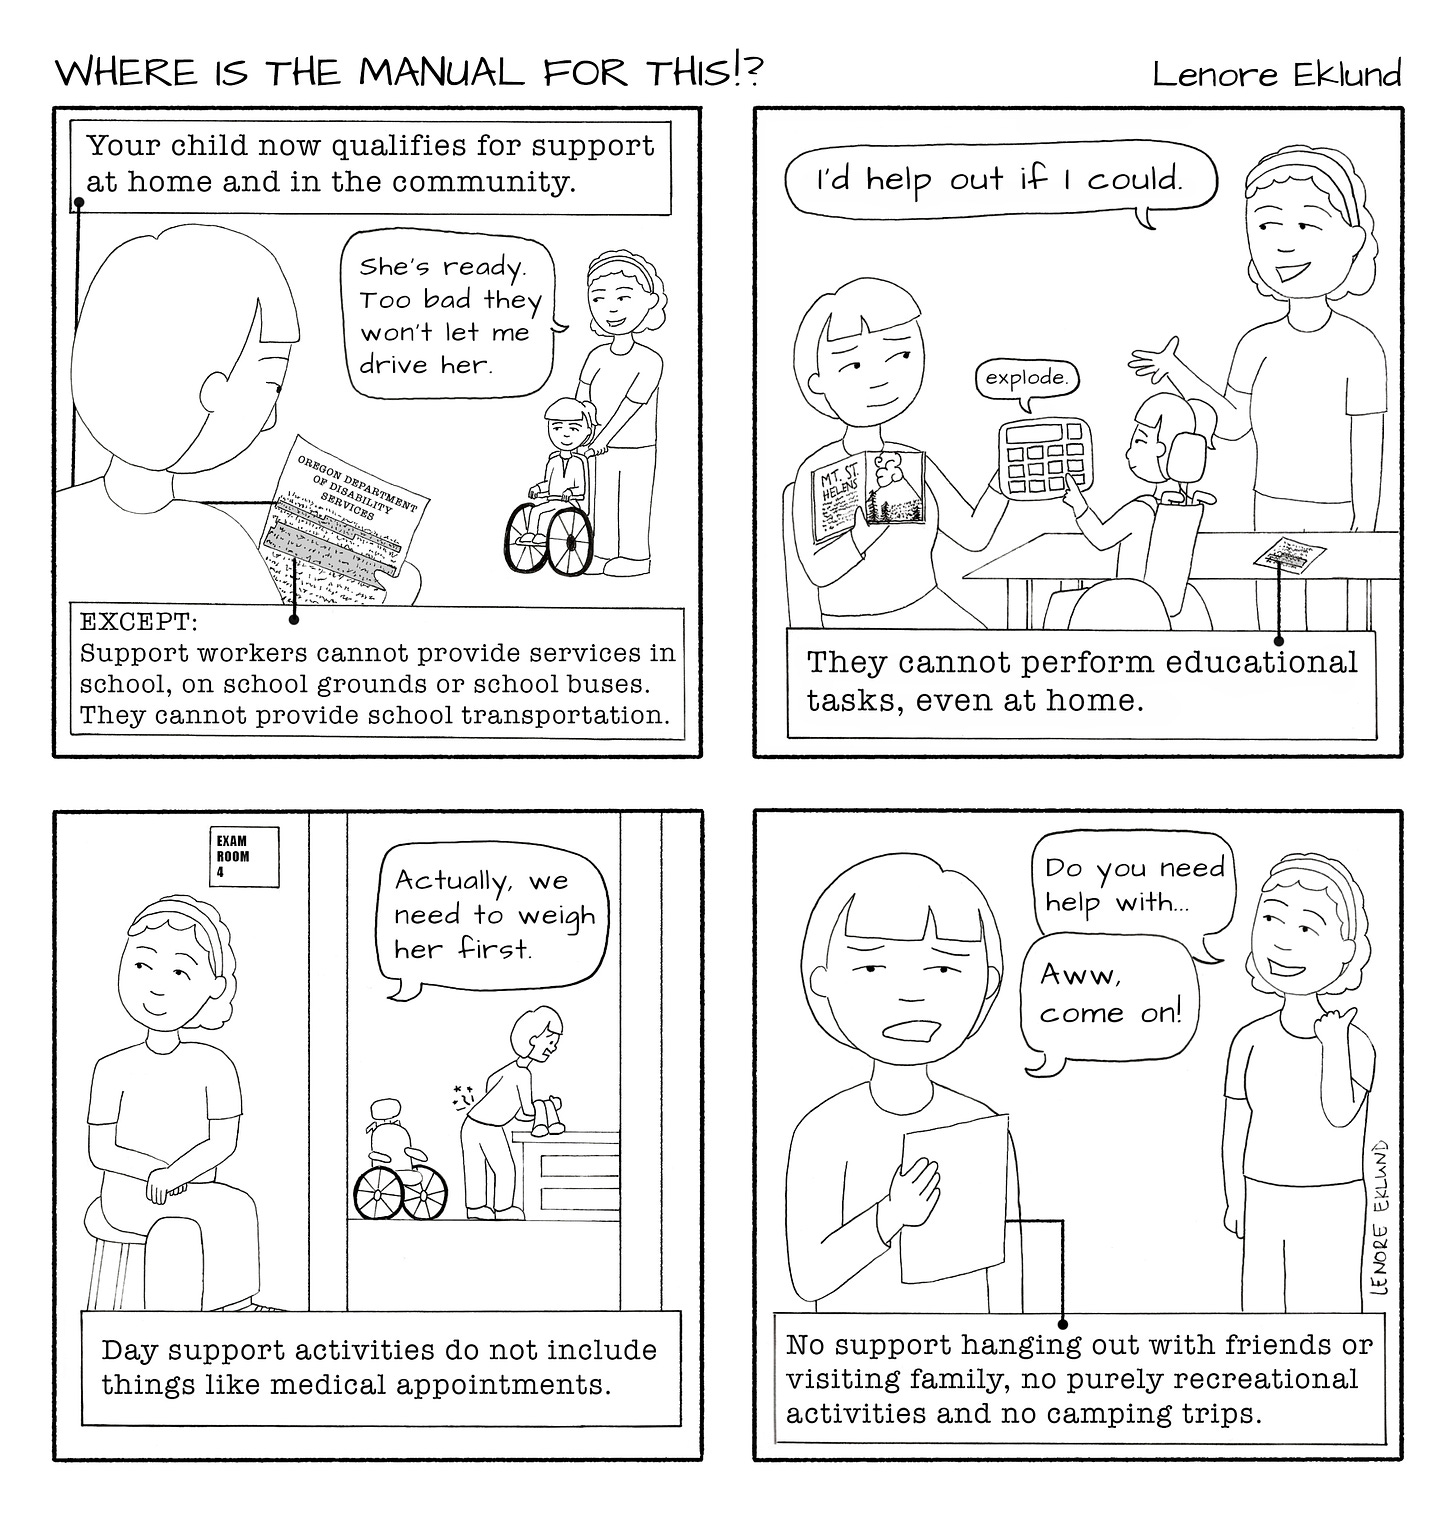 A four-panel line drawing cartoon. The first panel reads “Your child now qualifies for support at home and in the community.” A woman is reading a detailed letter in the foreground while a helper pushes her daughter’s wheelchair and says “She’s ready. Too bad they won’t let me drive her.” At the bottom, the letter continues: “EXCEPT: Support workers cannot provide services in school, on school grounds or school buses. They cannot provide school transportation.” In the second panel, the mom is holding a book of Mt. St. Helens and helping her daughter access a talking device. The girl pushes the “explode” button. The helper says “I’d help out if I could.” The caption reads: “They cannot perform educational tasks, even at home.” In the third panel, the helper waits outside an exam room, while the mom lifts the child onto a table, a pain shooting in her back. A speech bubble from the other side of the room reads “Actually, we need to weigh her first.” The caption reads: “Day support activities do not include things like medical appointments.” In the final panel, the helper says “Do you need help with…” but the mom is looking at the letter and says “Aw come on!” The letter reads: “No support hanging out with friends or visiting family, no purely recreational activities and no camping trips.”